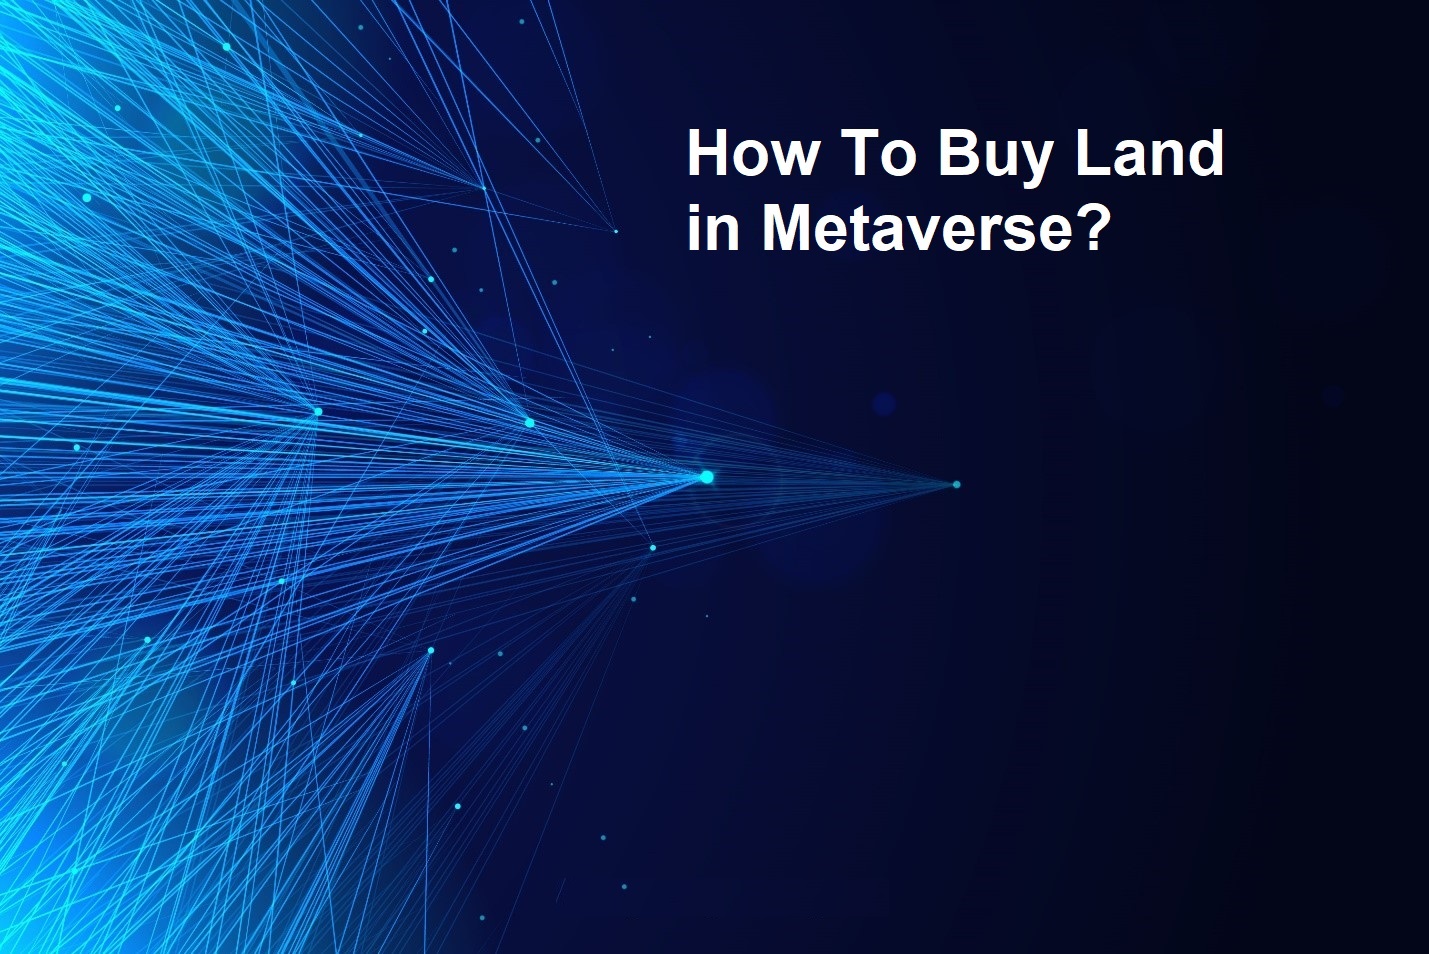 How to buy land in Metaverse